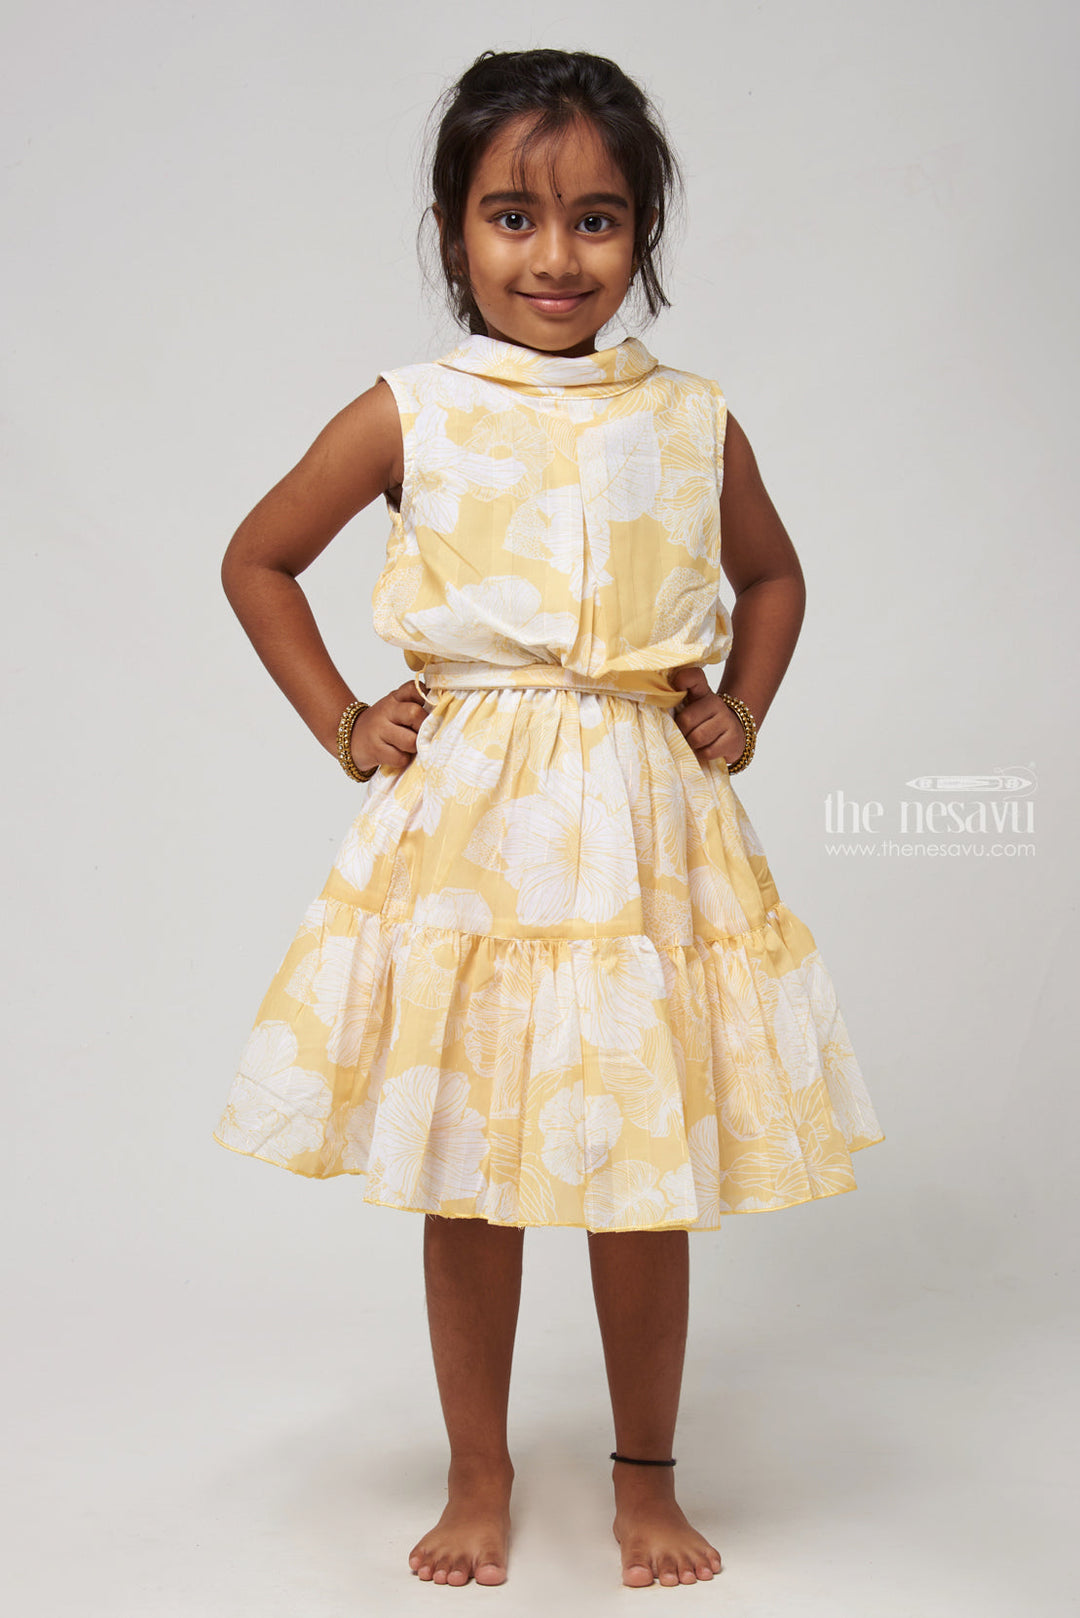 The Nesavu Girls Fancy Frock Stylish High Neck Collared Yellow Frock for Girls - Comfortable Cotton Dress Nesavu 18 (2Y) / Yellow / Georgette GFC1103A-18 Floral Printed Fancy Frock | Girls Cotton Frocks | the Nesavu